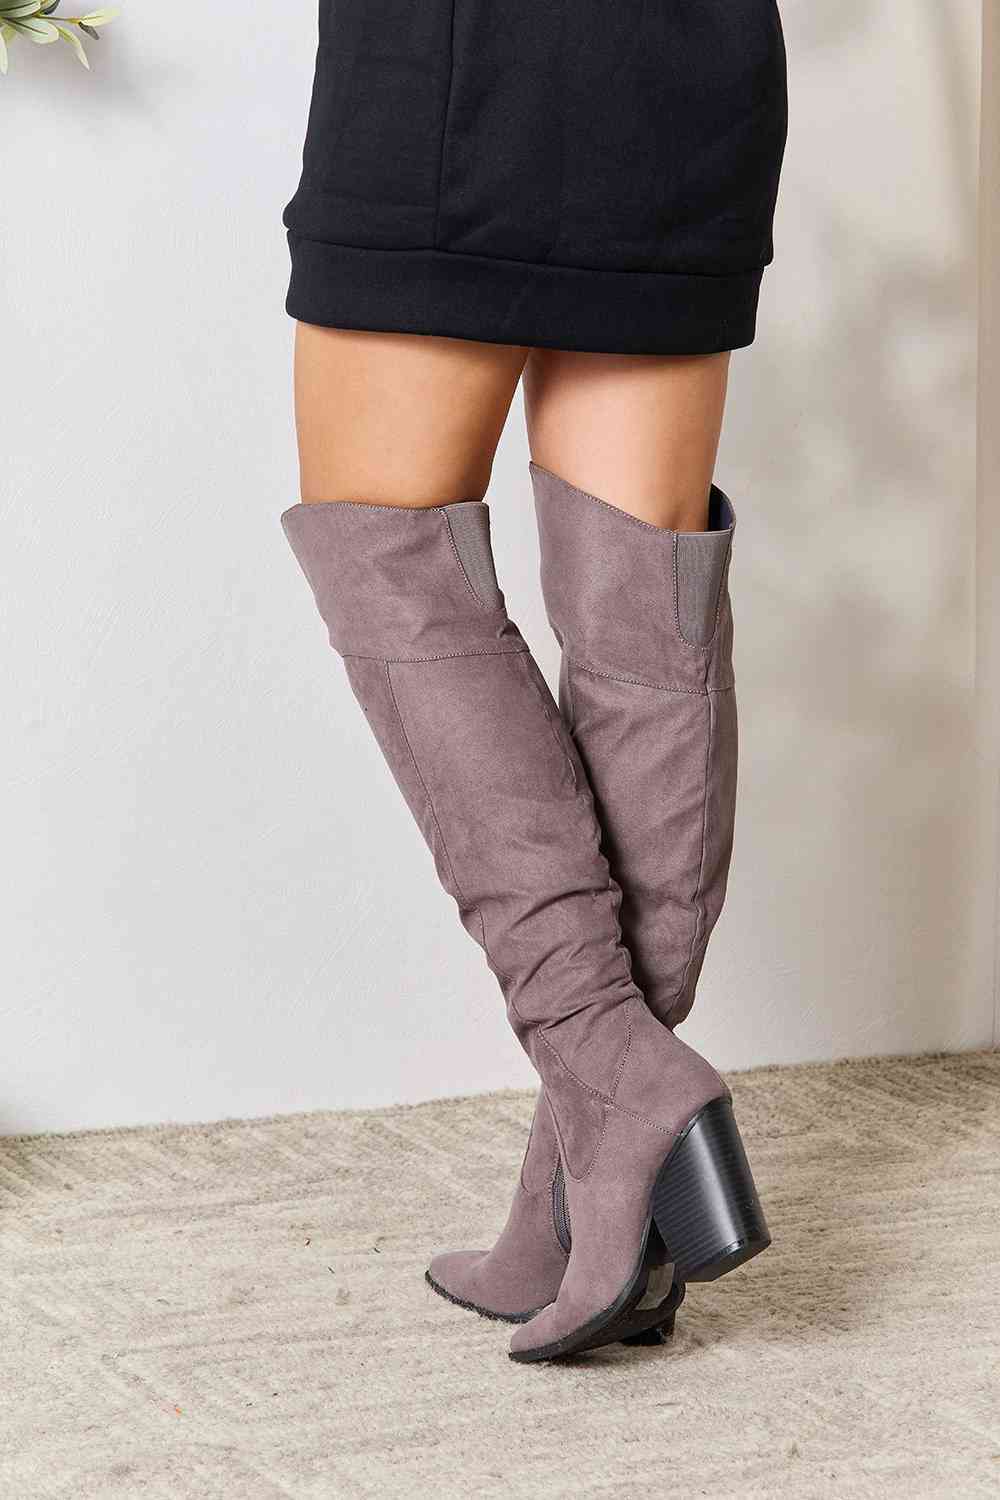 Gray East Lion Corp Block Heel Knee High Boots Sentient Beauty Fashions Shoes